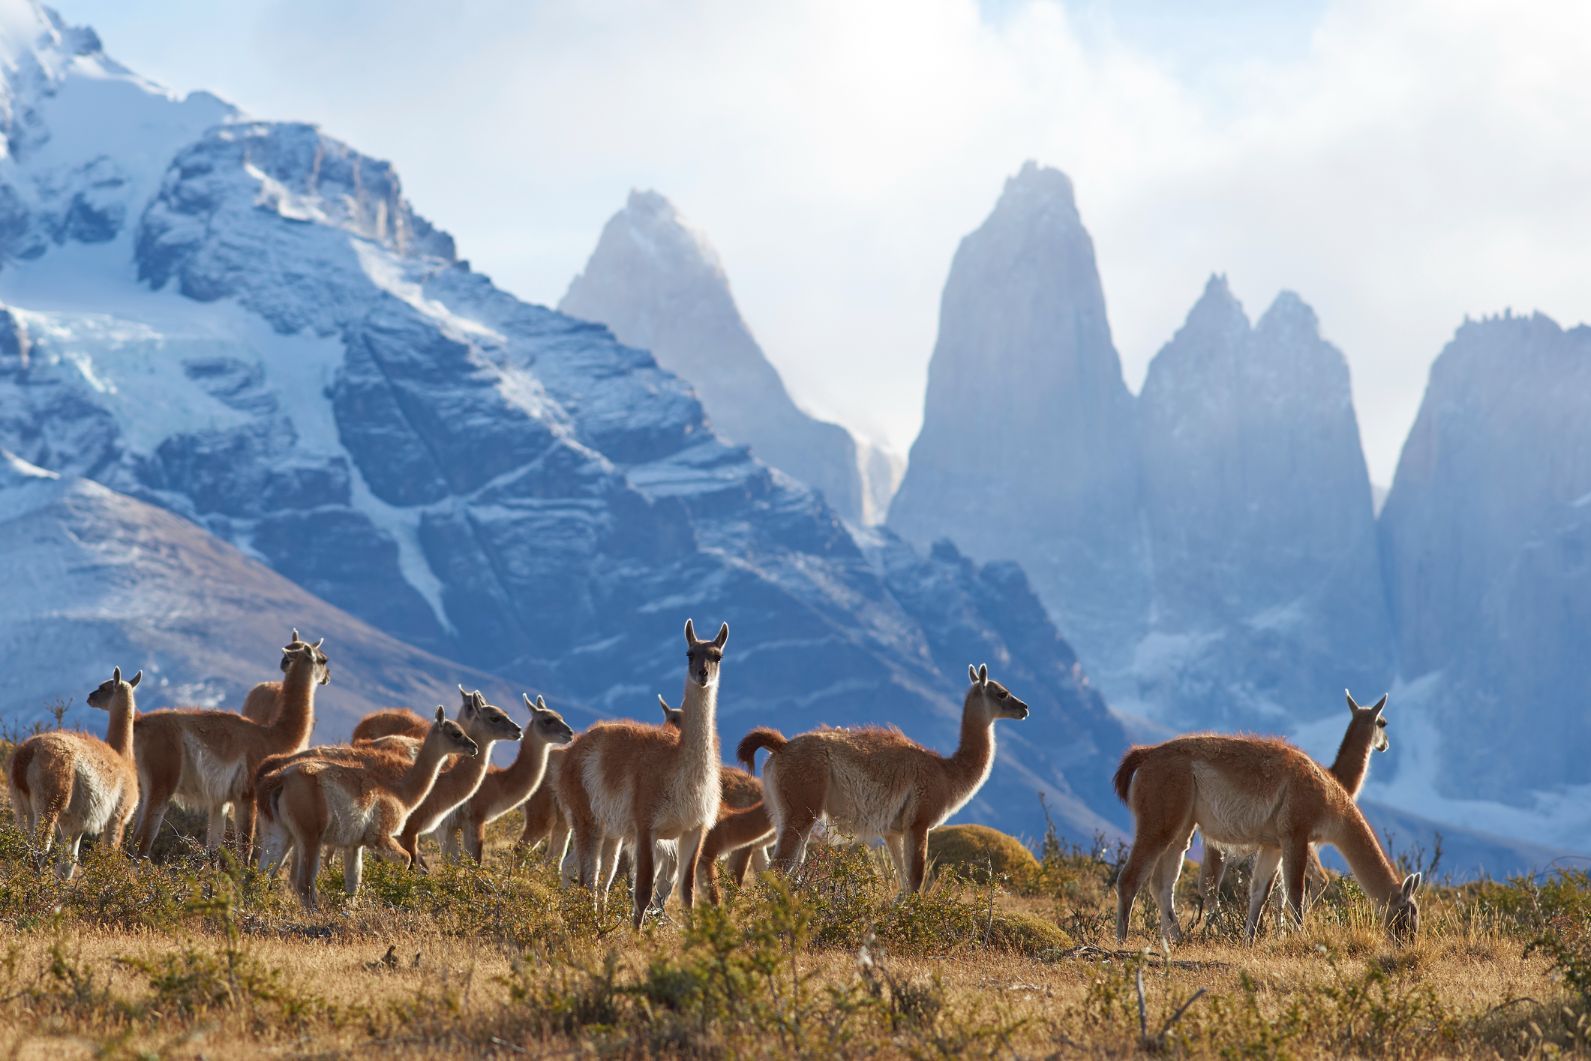 "Actually, I'm not a llama," say the Guanacos, as they stare towards the mountains. Photo: Getty